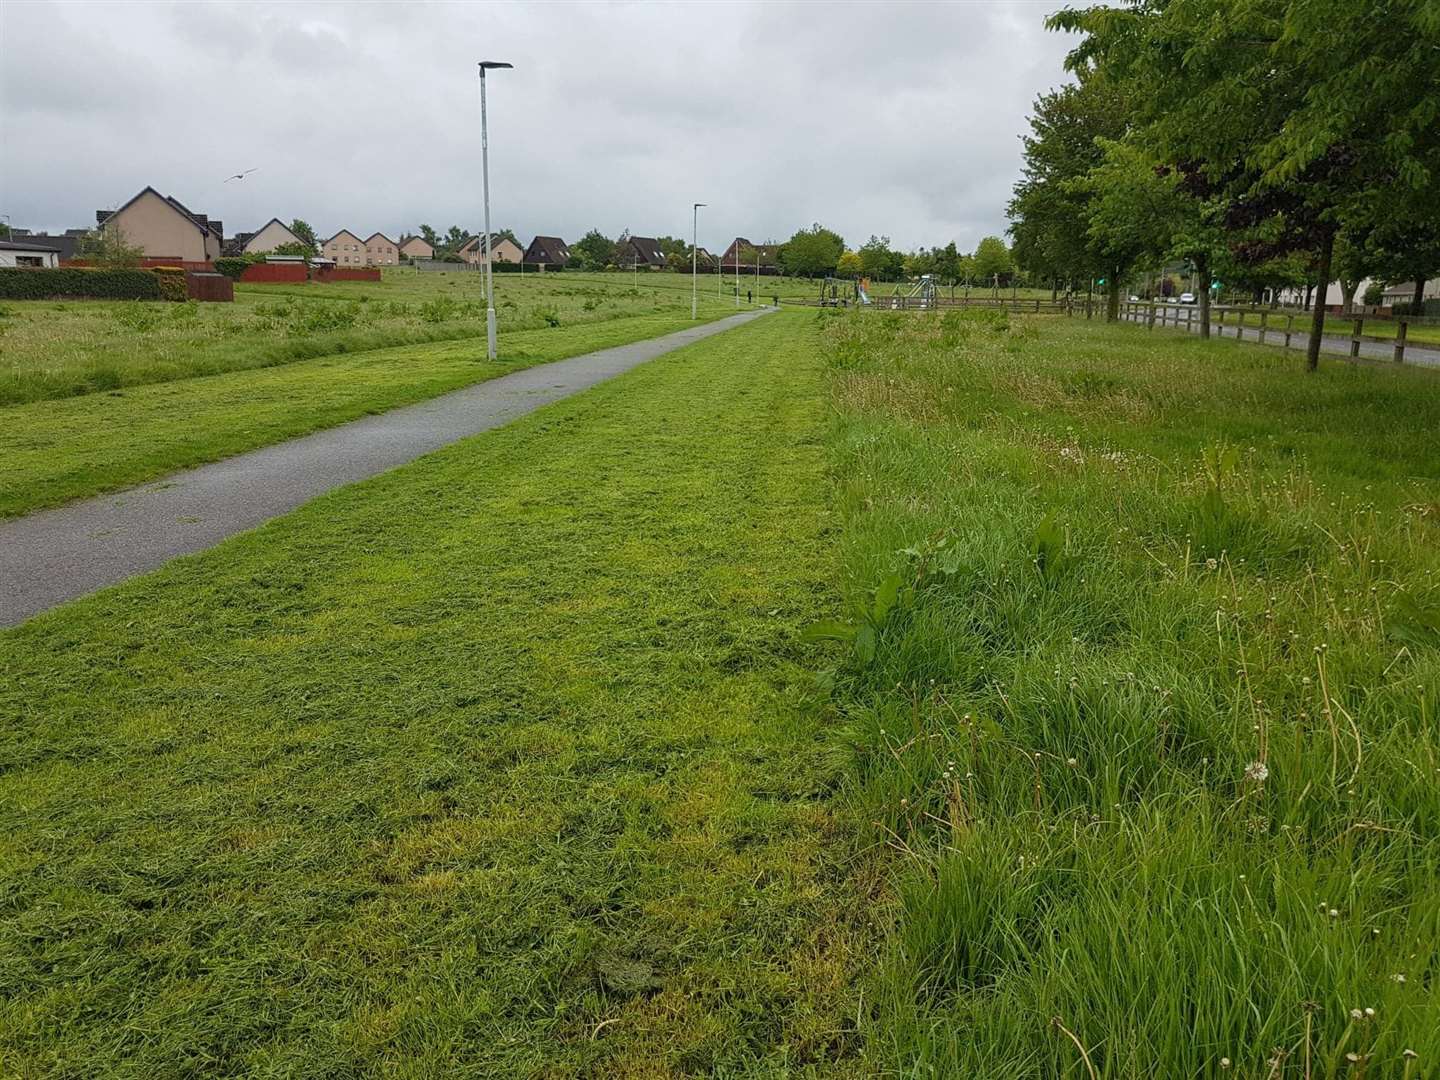 Council workers cut the grass at Mannachie park recently.